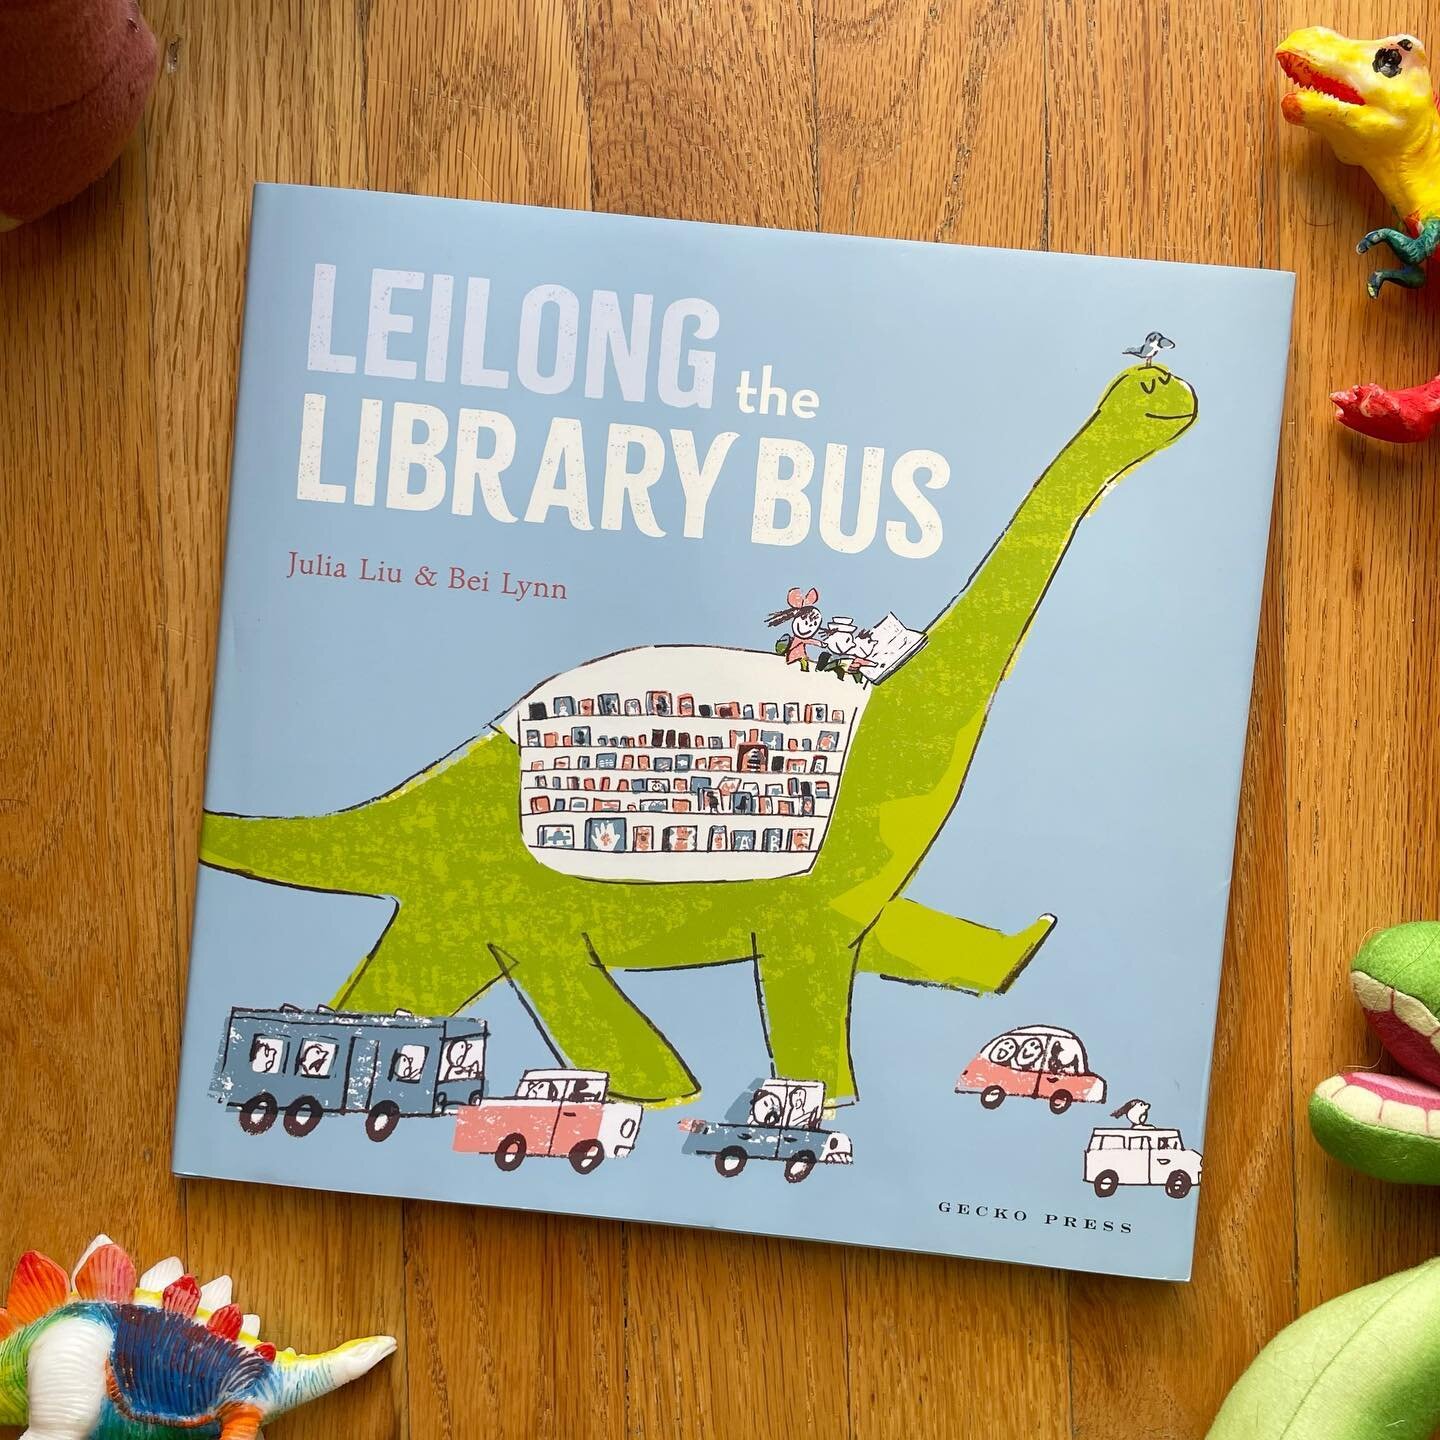 Raise your hands if your kid has gone through a dinosaur phase...lauren's littlest is currently in the midst of one, and LEILONG THE LIBRARY BUS is one of our current favorite books!

Leilong is a book loving dinosaur who yearns to know more about di